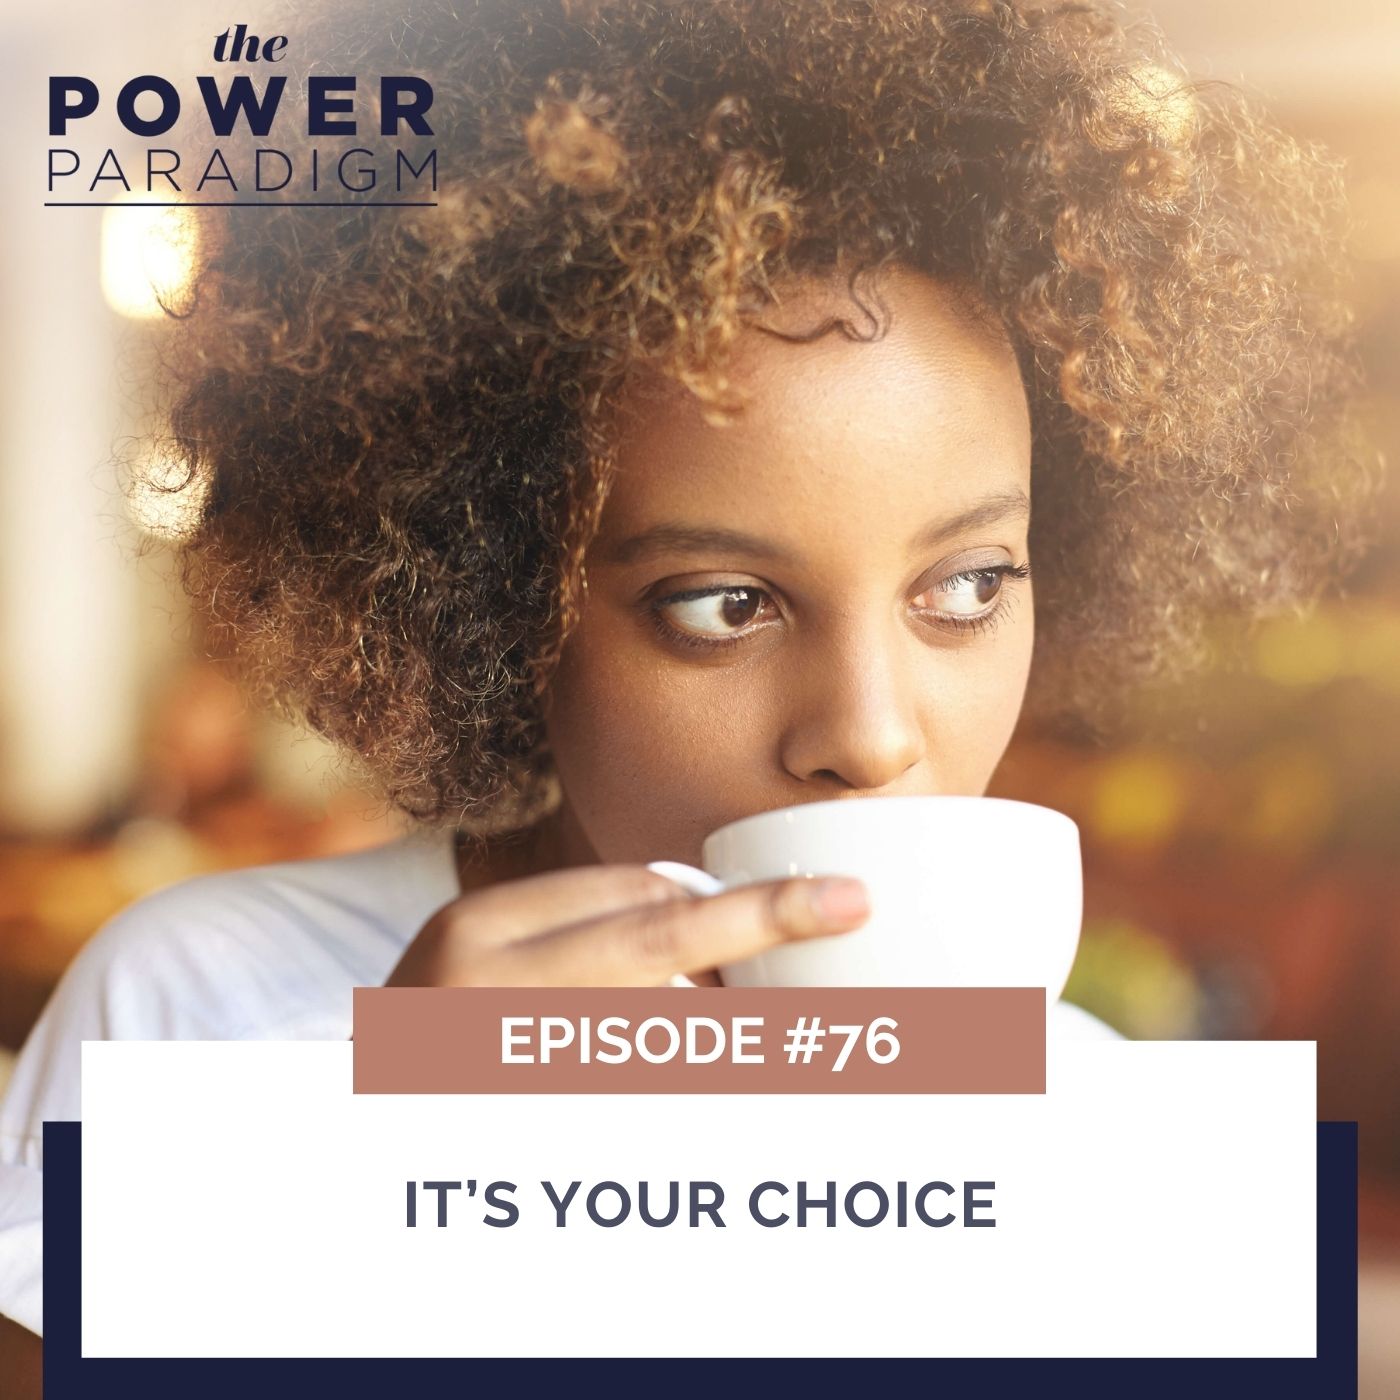 The Power Paradigm | It’s Your Choice